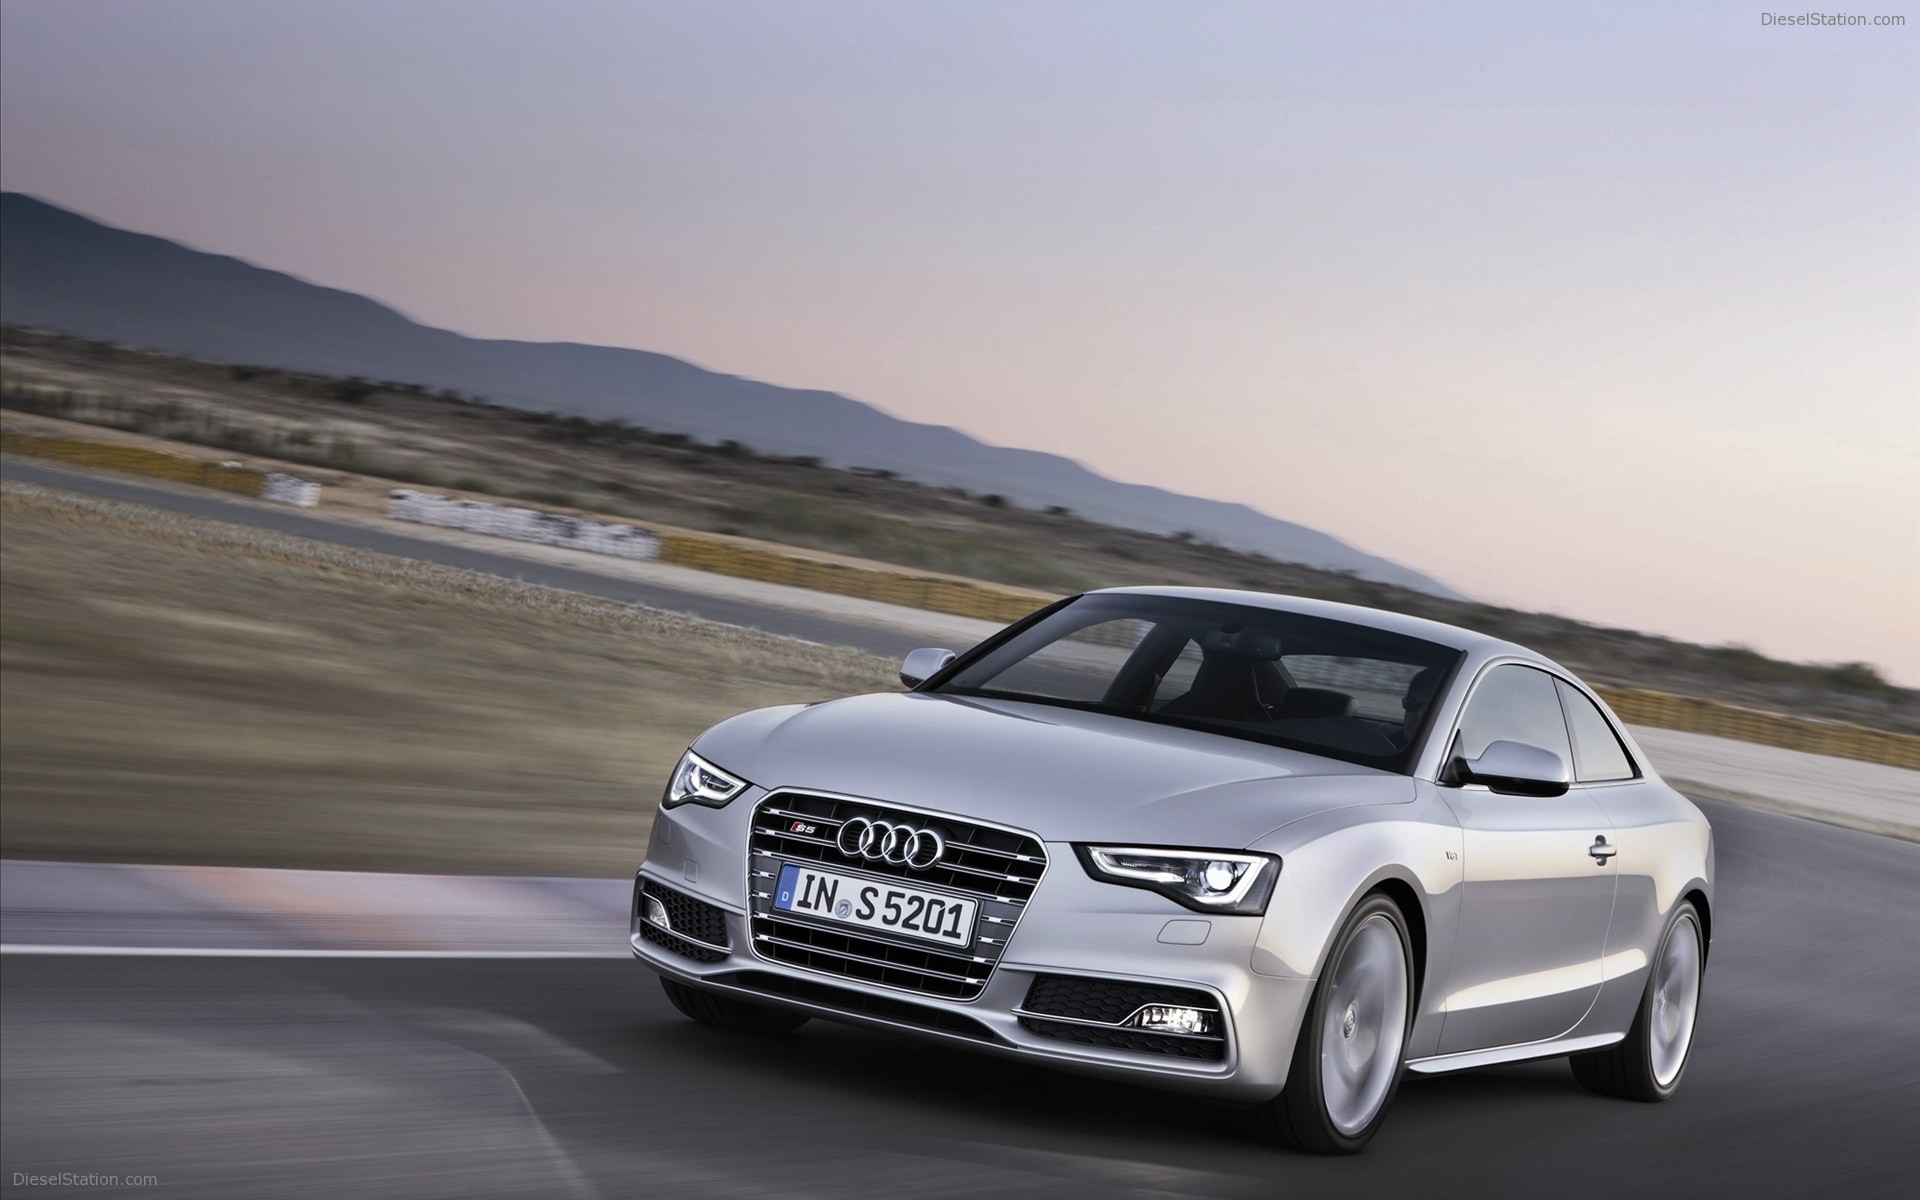 Gallery For Gt Audi S5 Wallpaper